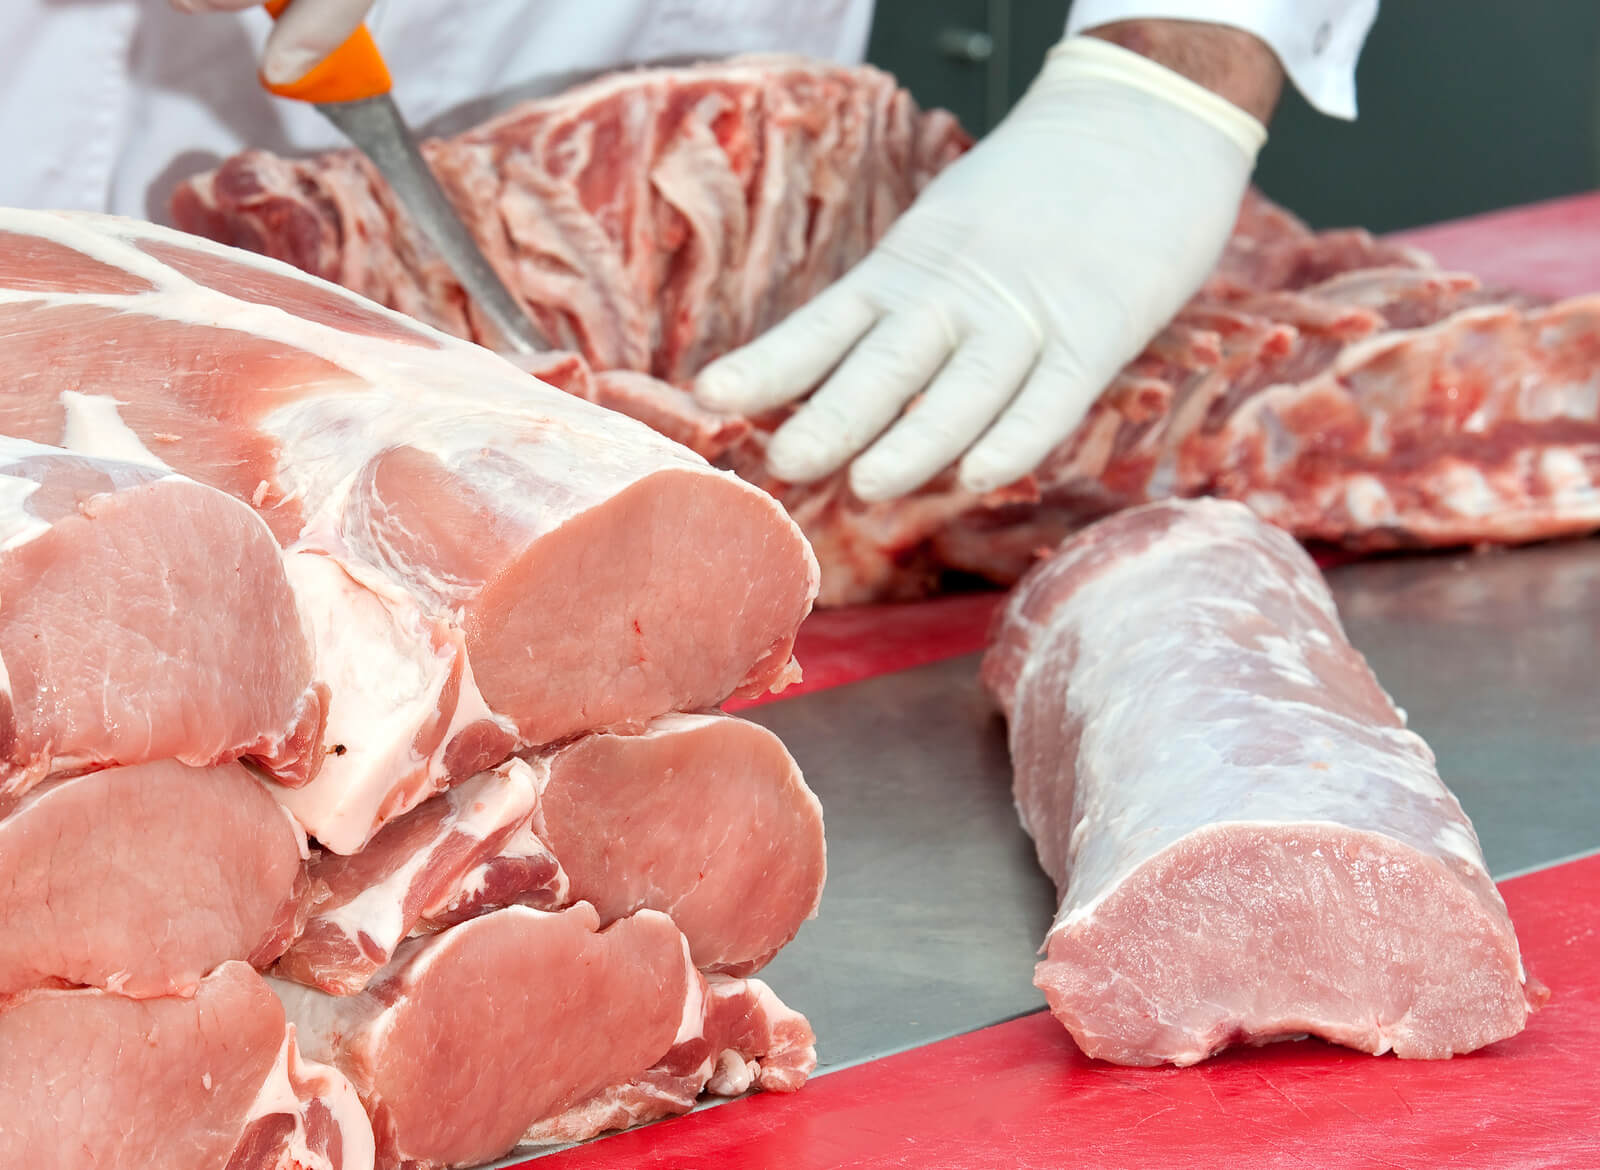 What to Look for When Buying Pork: Guide to the Freshest Meat